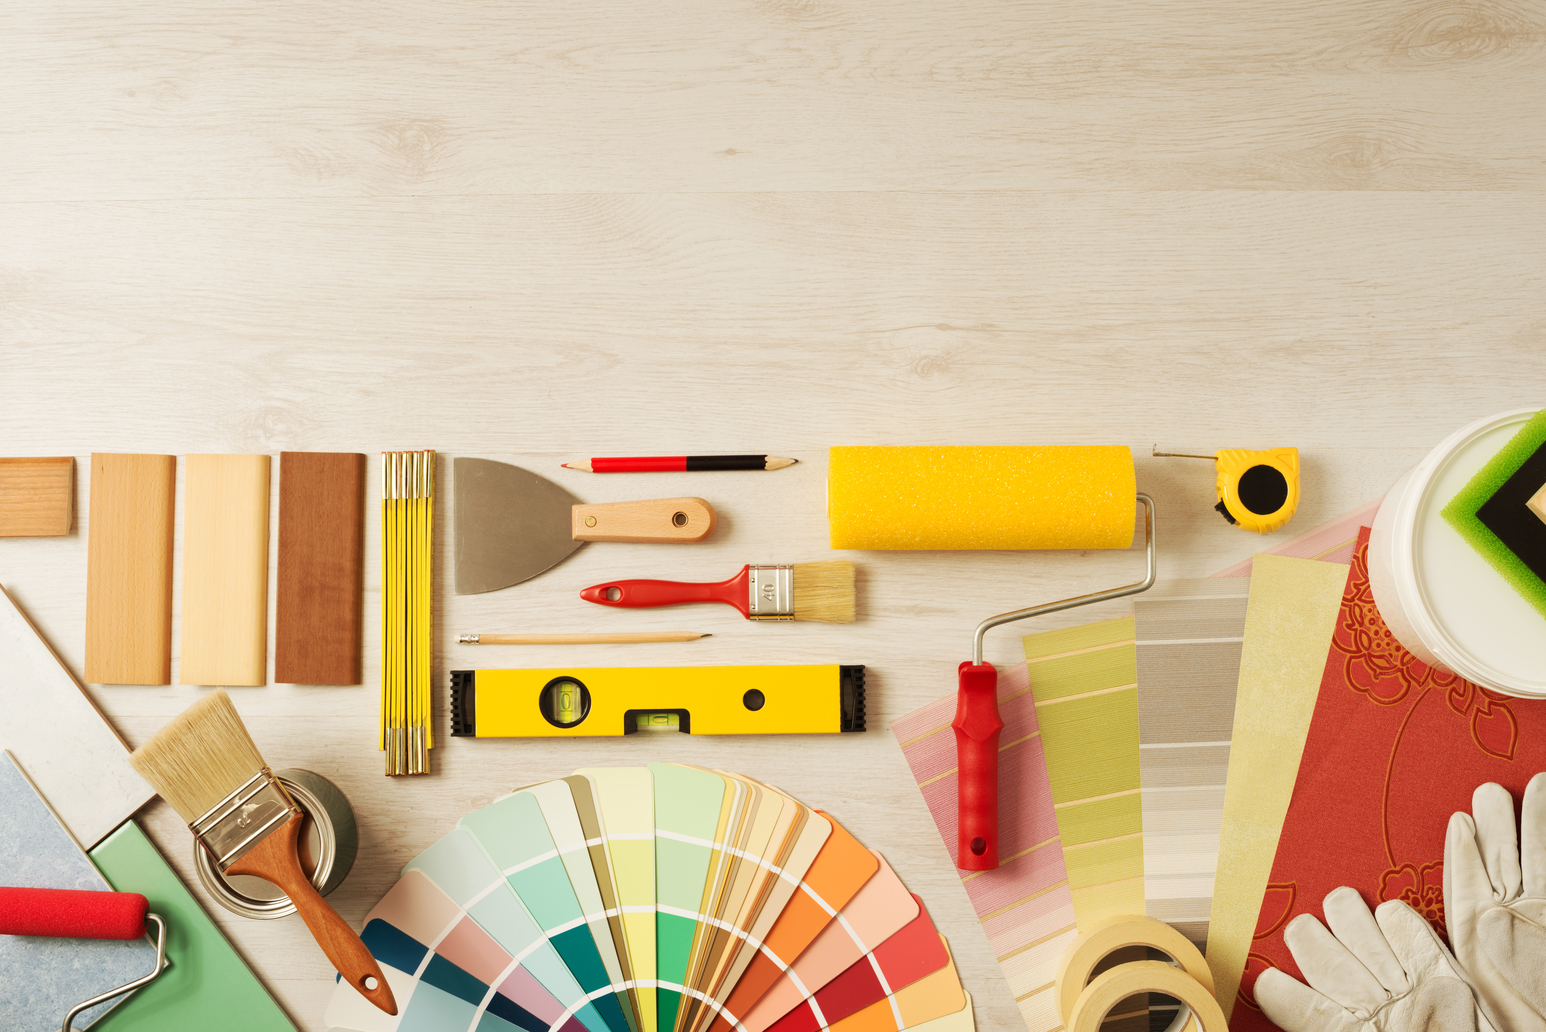 Home Renovation: The Do’s and Don’ts